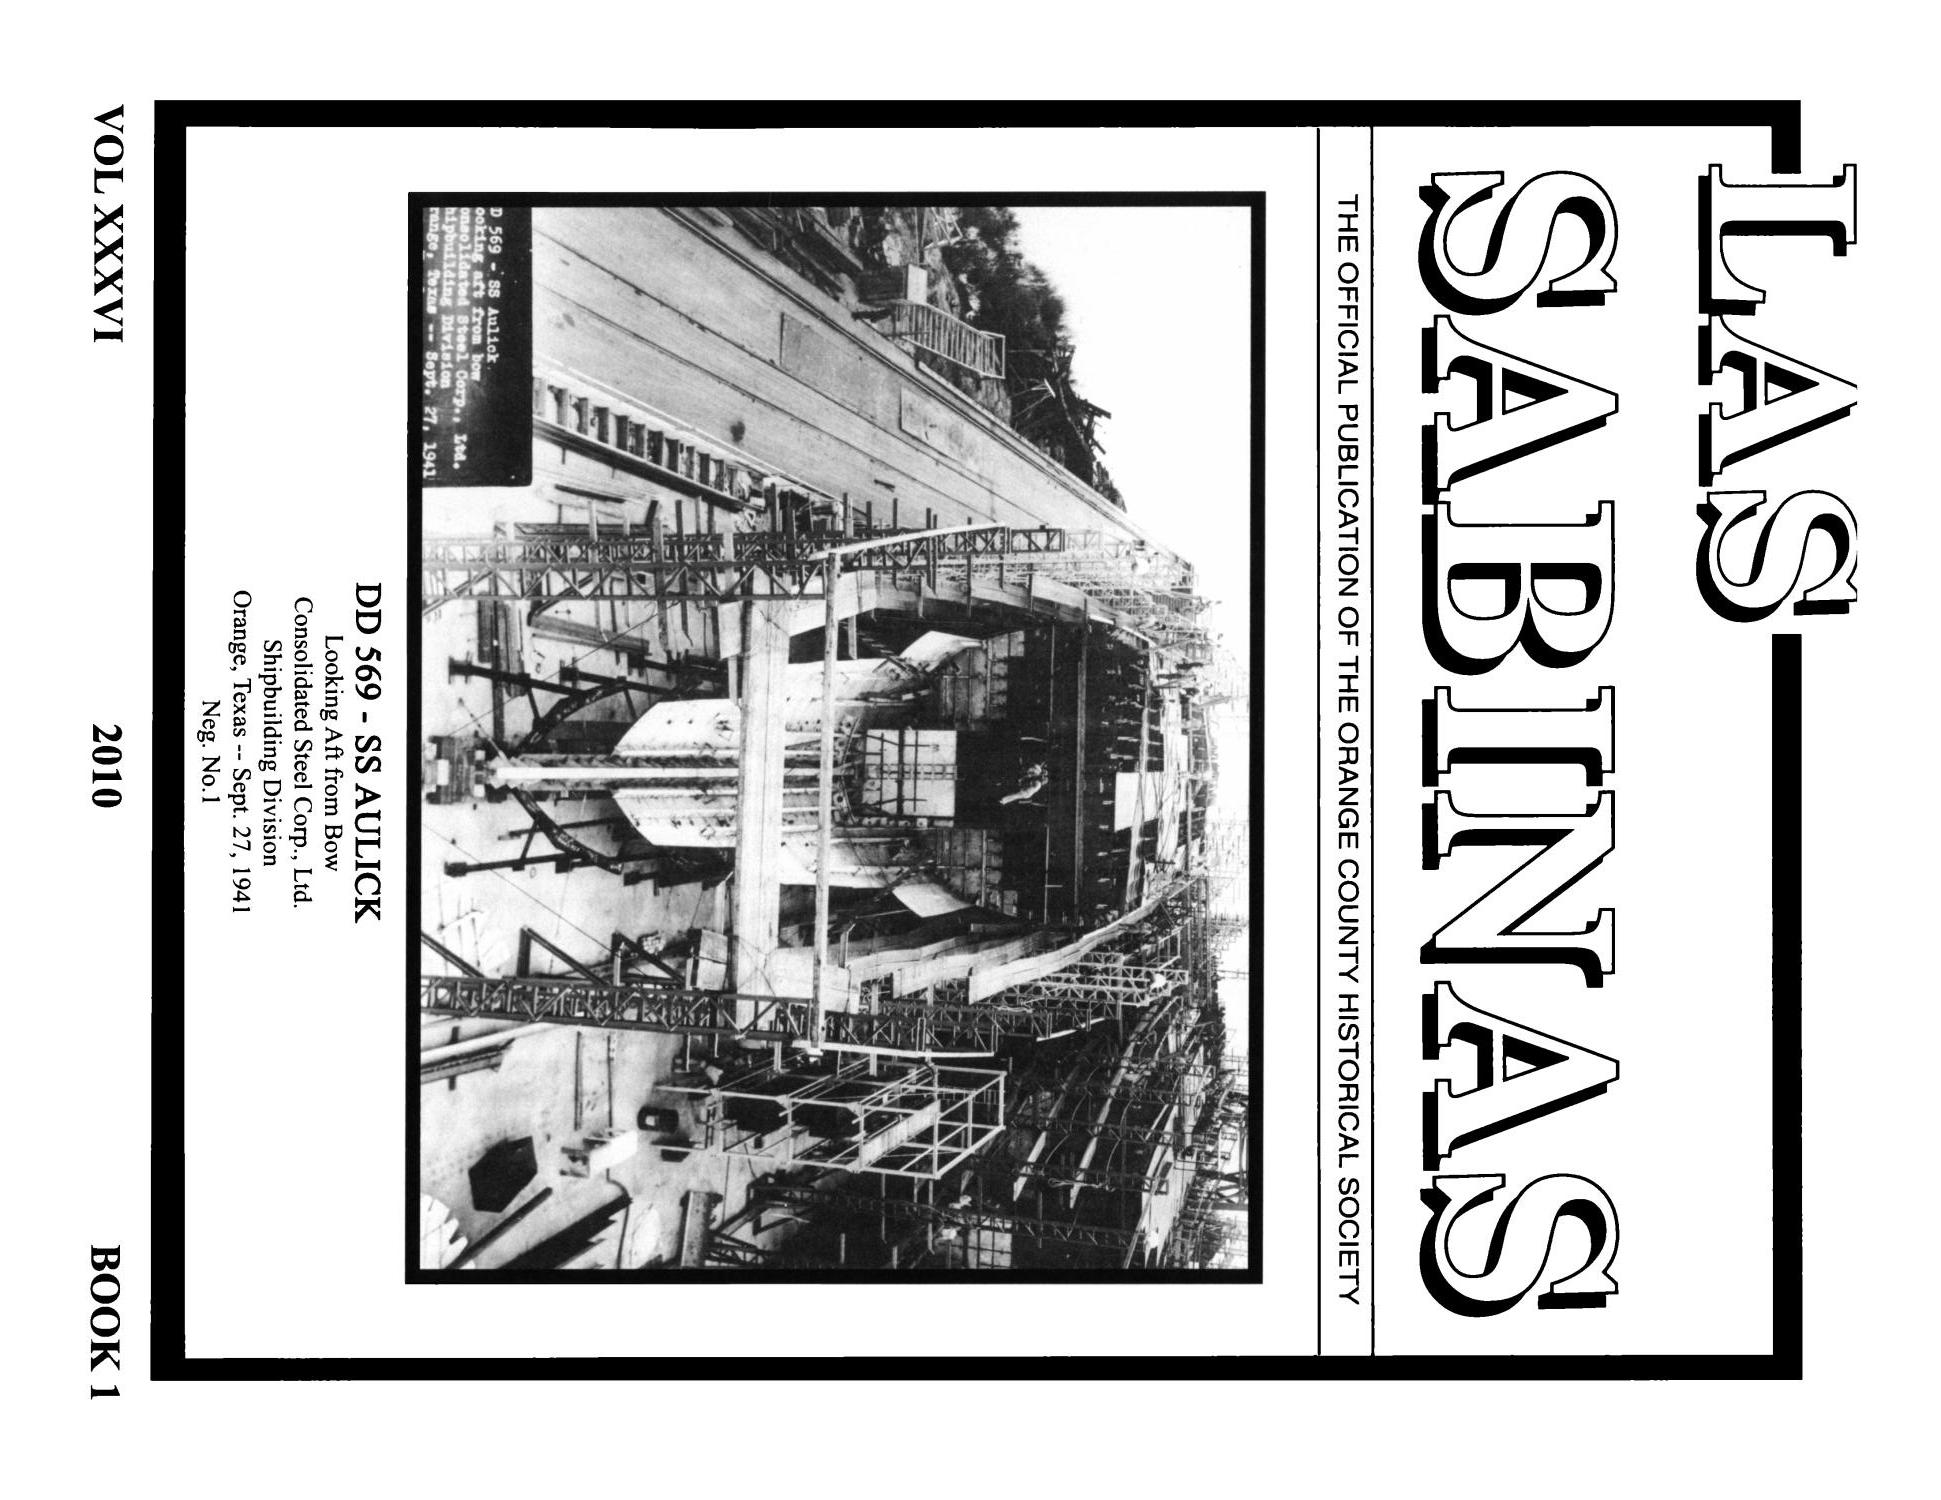 Las Sabinas, Volume 36, Number 1, 2010
                                                
                                                    Front Cover
                                                